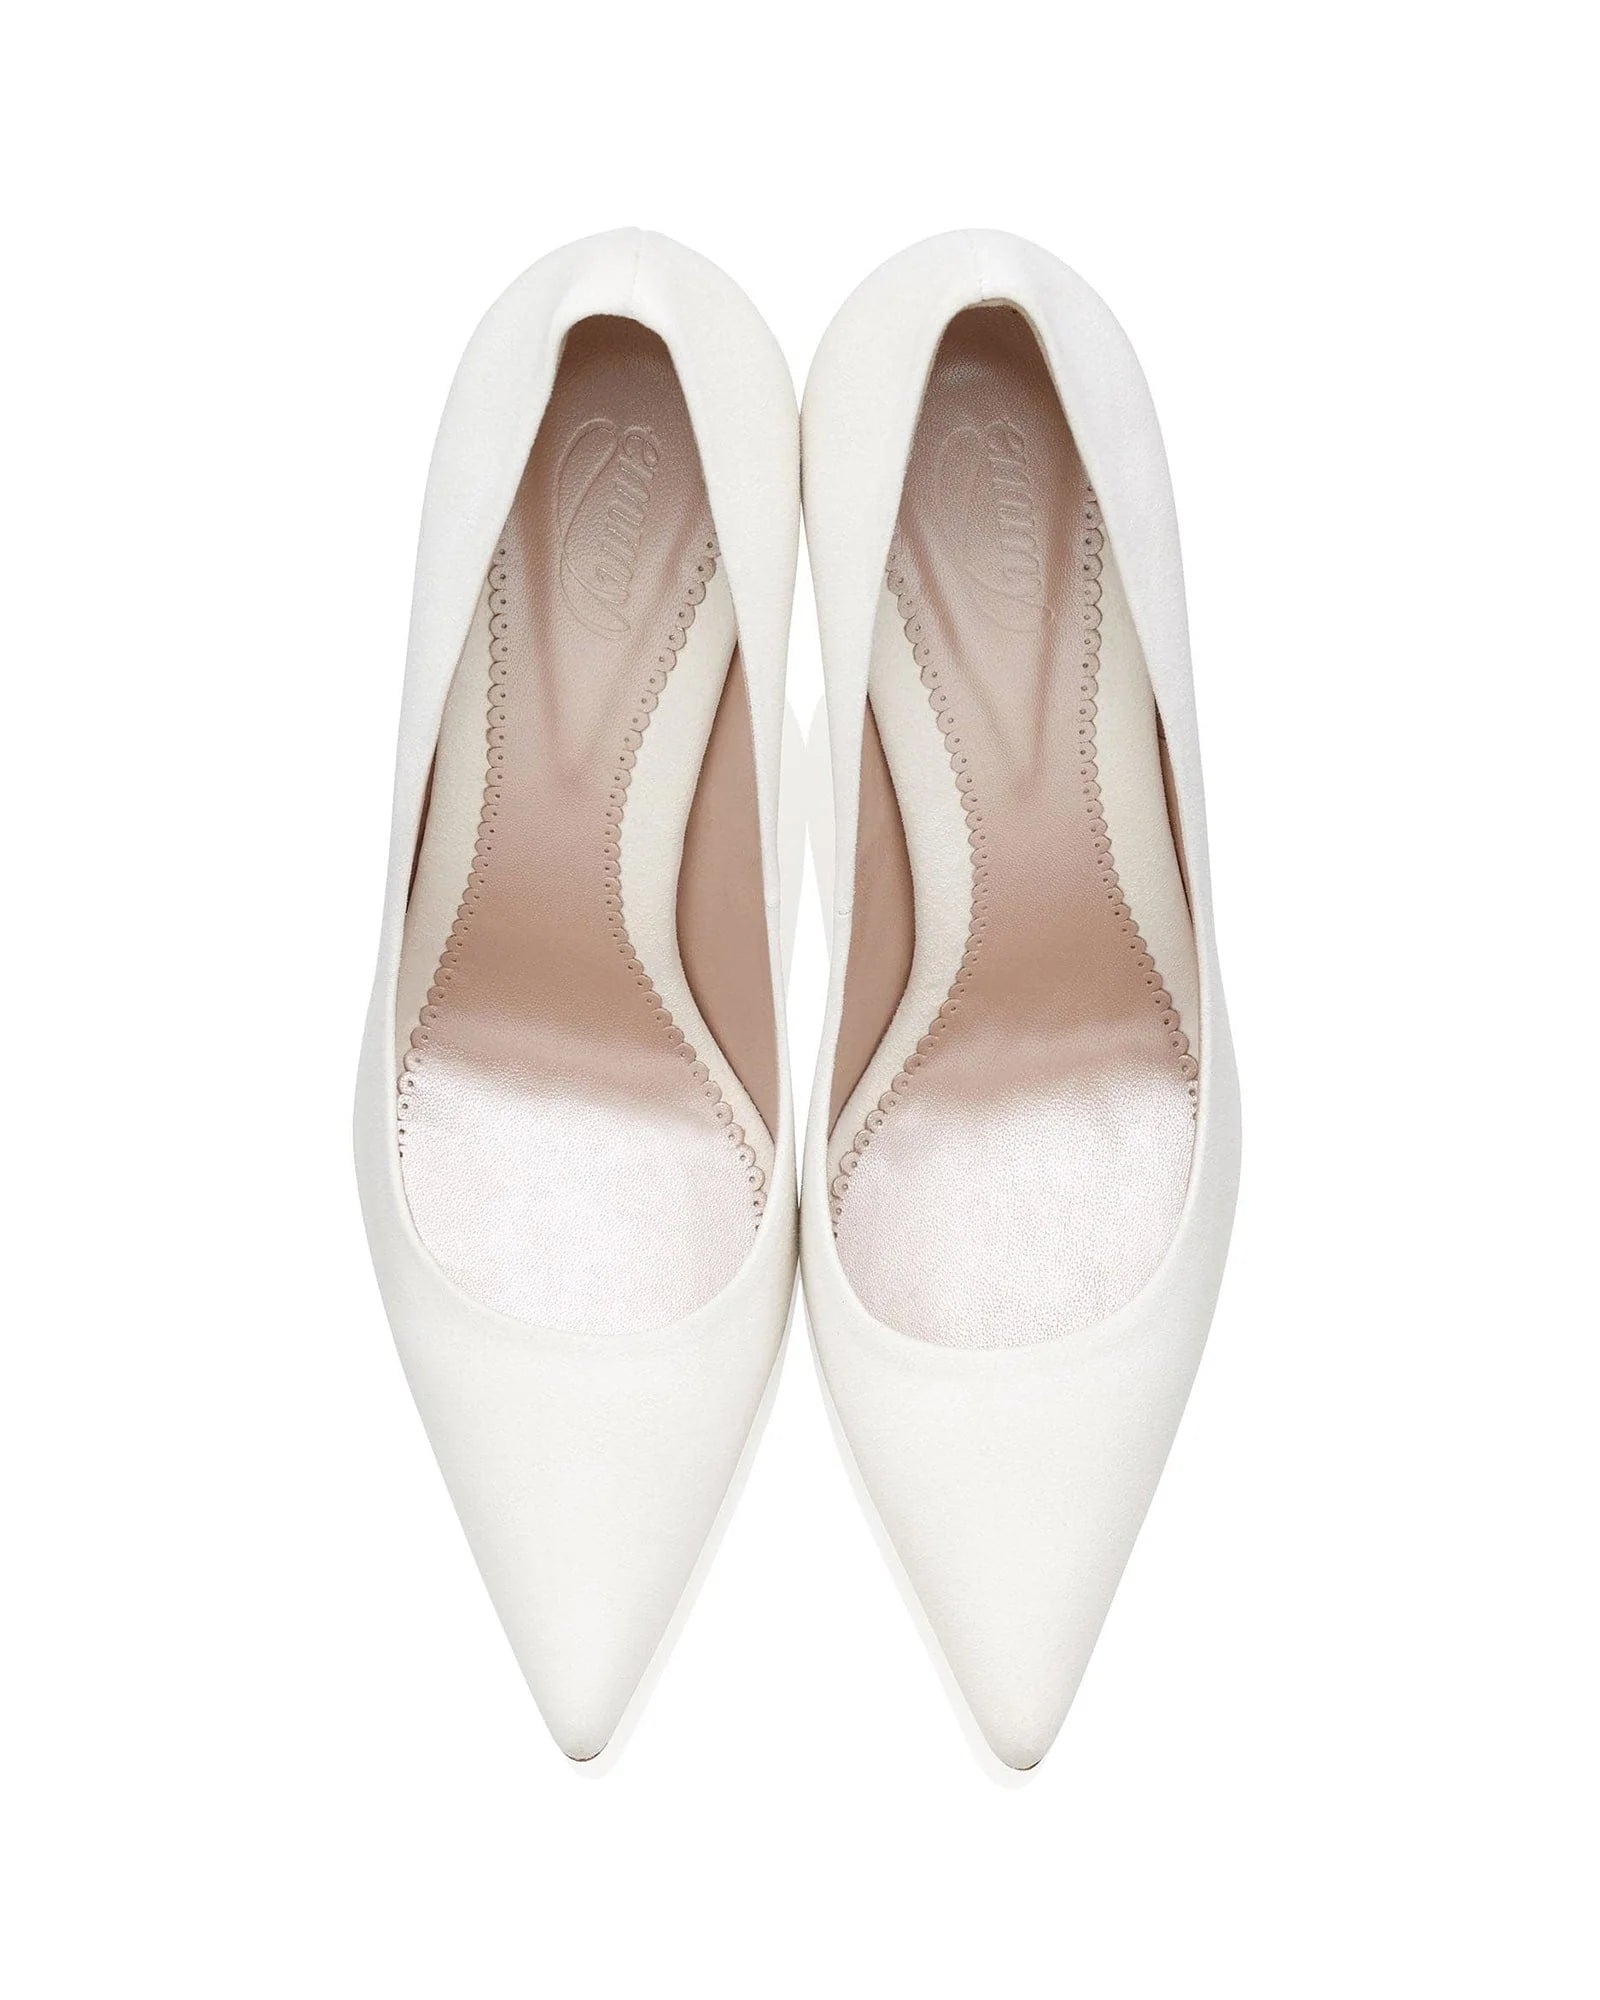 Claudia Mid Heel Bridal Shoe Ivory Pointed Court Shoes  image